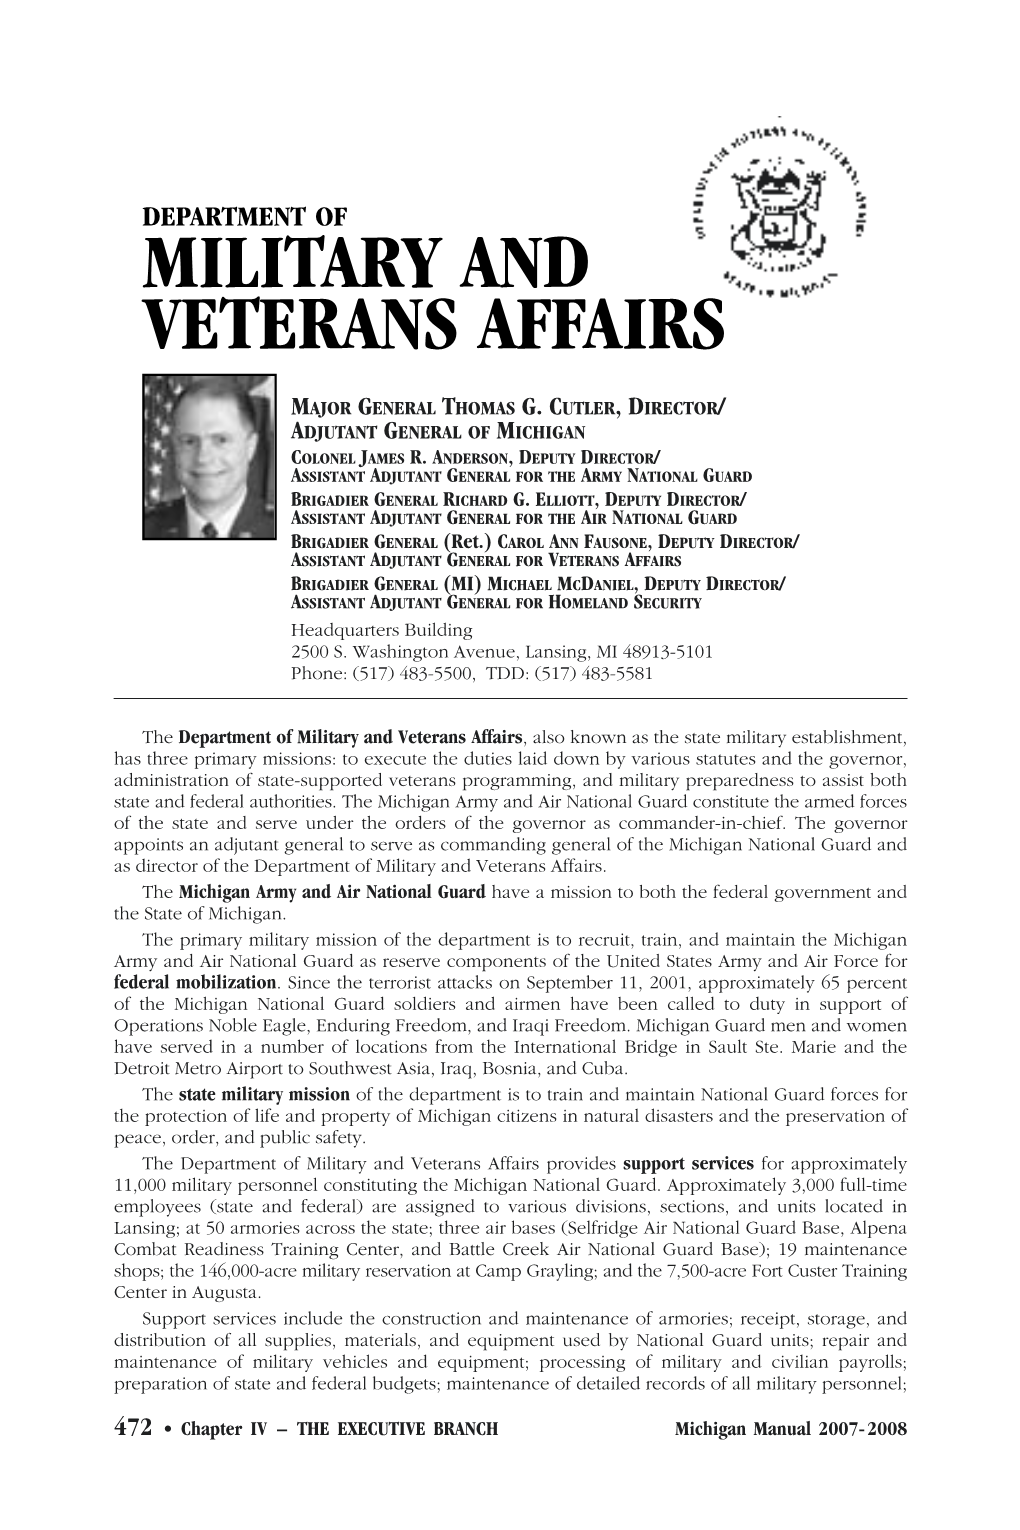 Military and Veterans Affairs